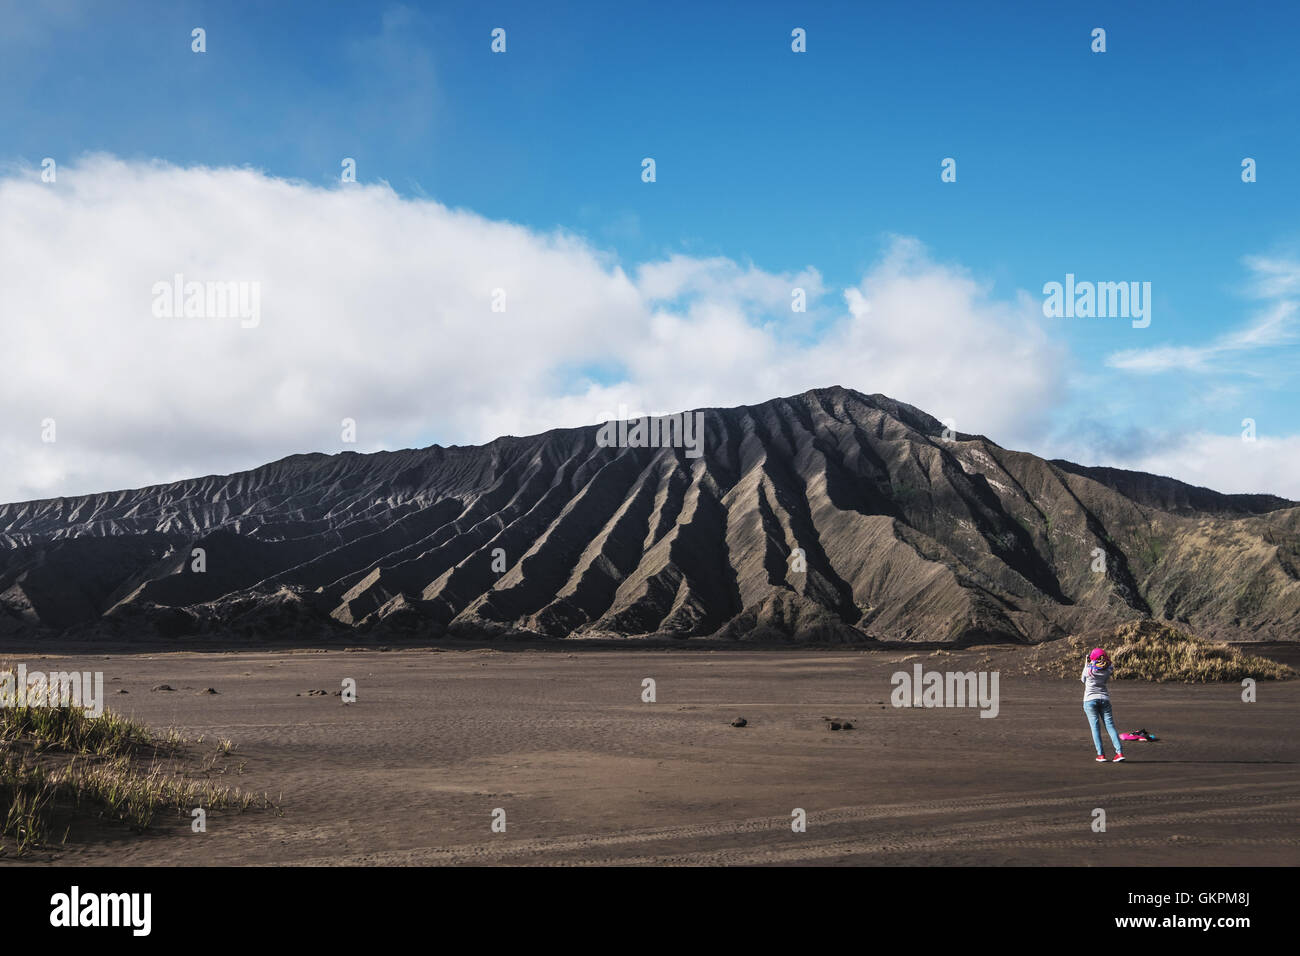 Landscape of Mount Bromo, Indonesia with tourist woman Stock Photo